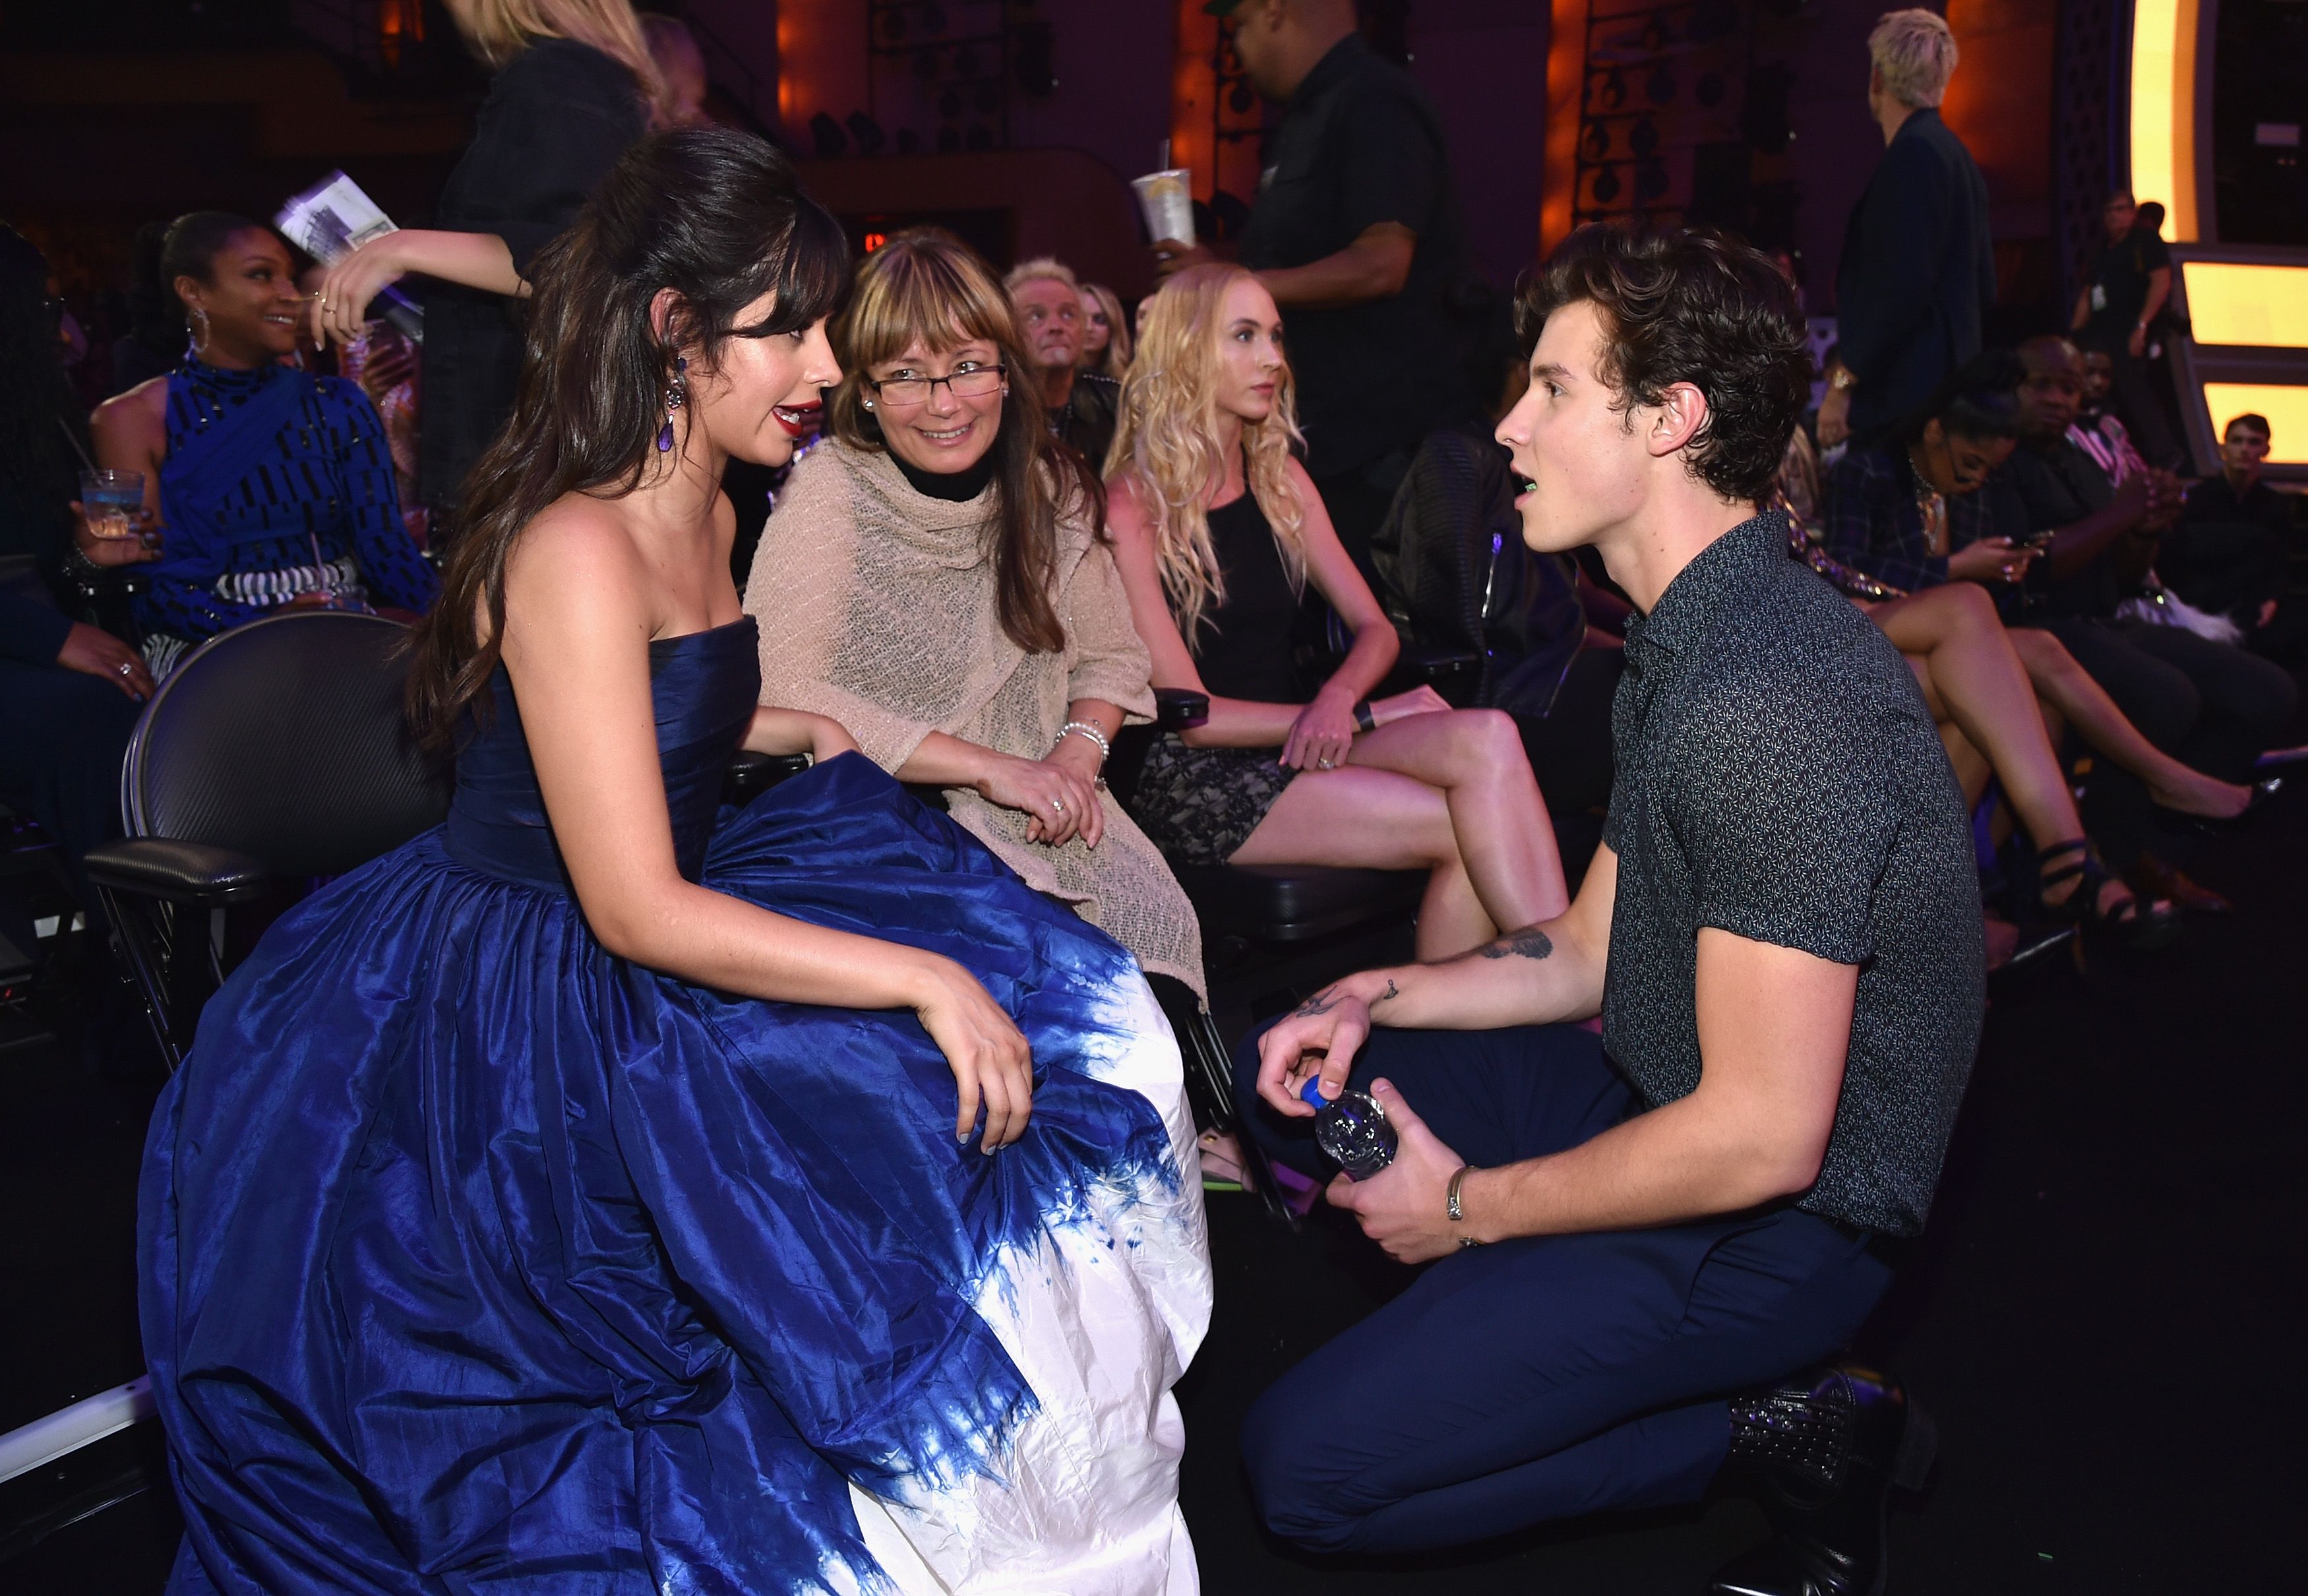 Shawn Mendes & Camila Cabello Spotted With Touch Bracelets For